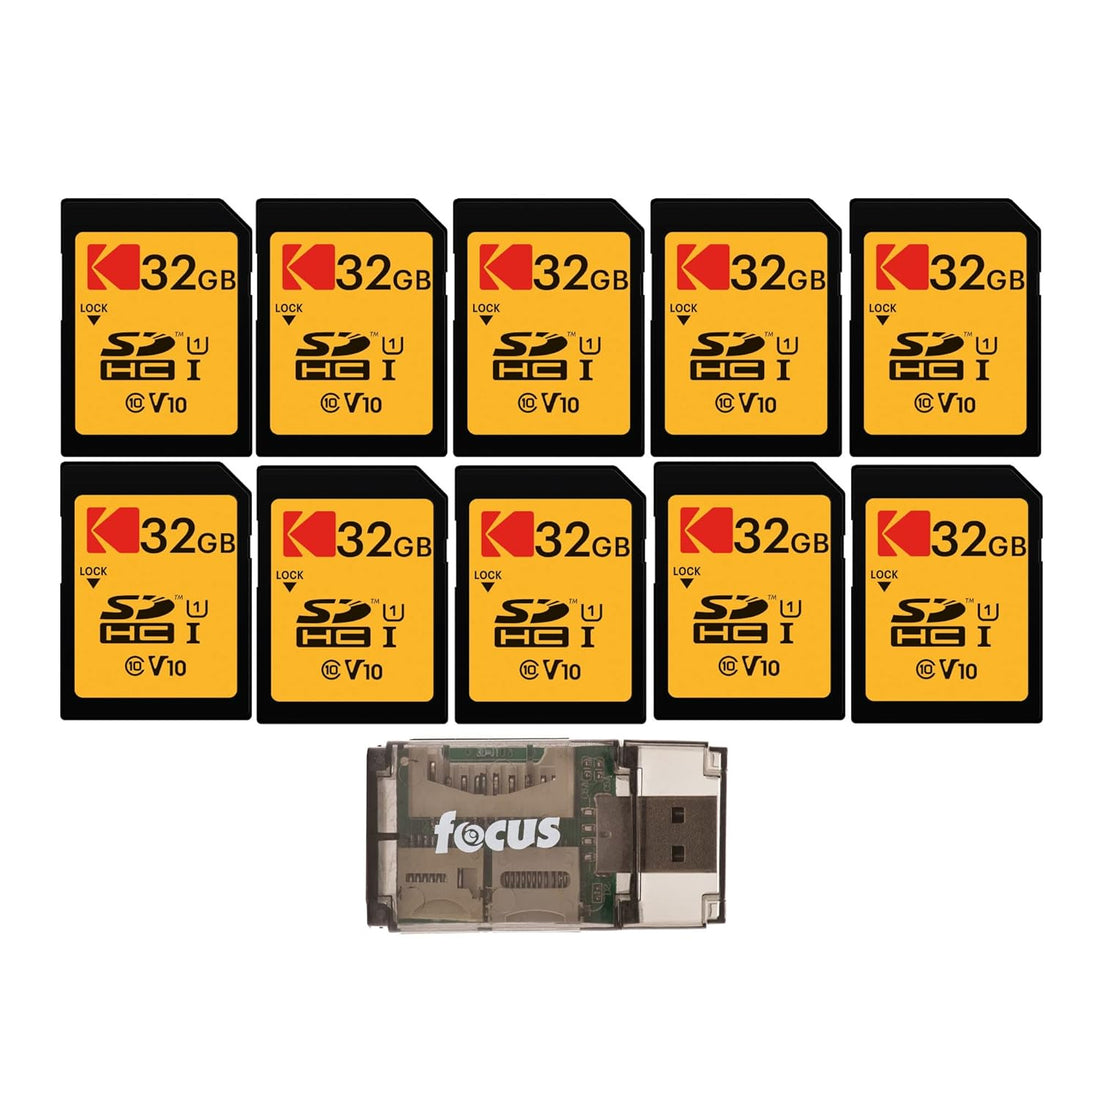 Kodak 32GB Class 10 UHS-I U1 SDHC Memory Card (10-Pack) Bundle with All-in-One High-Speed USB 2.0 Card Reader (11 Items)